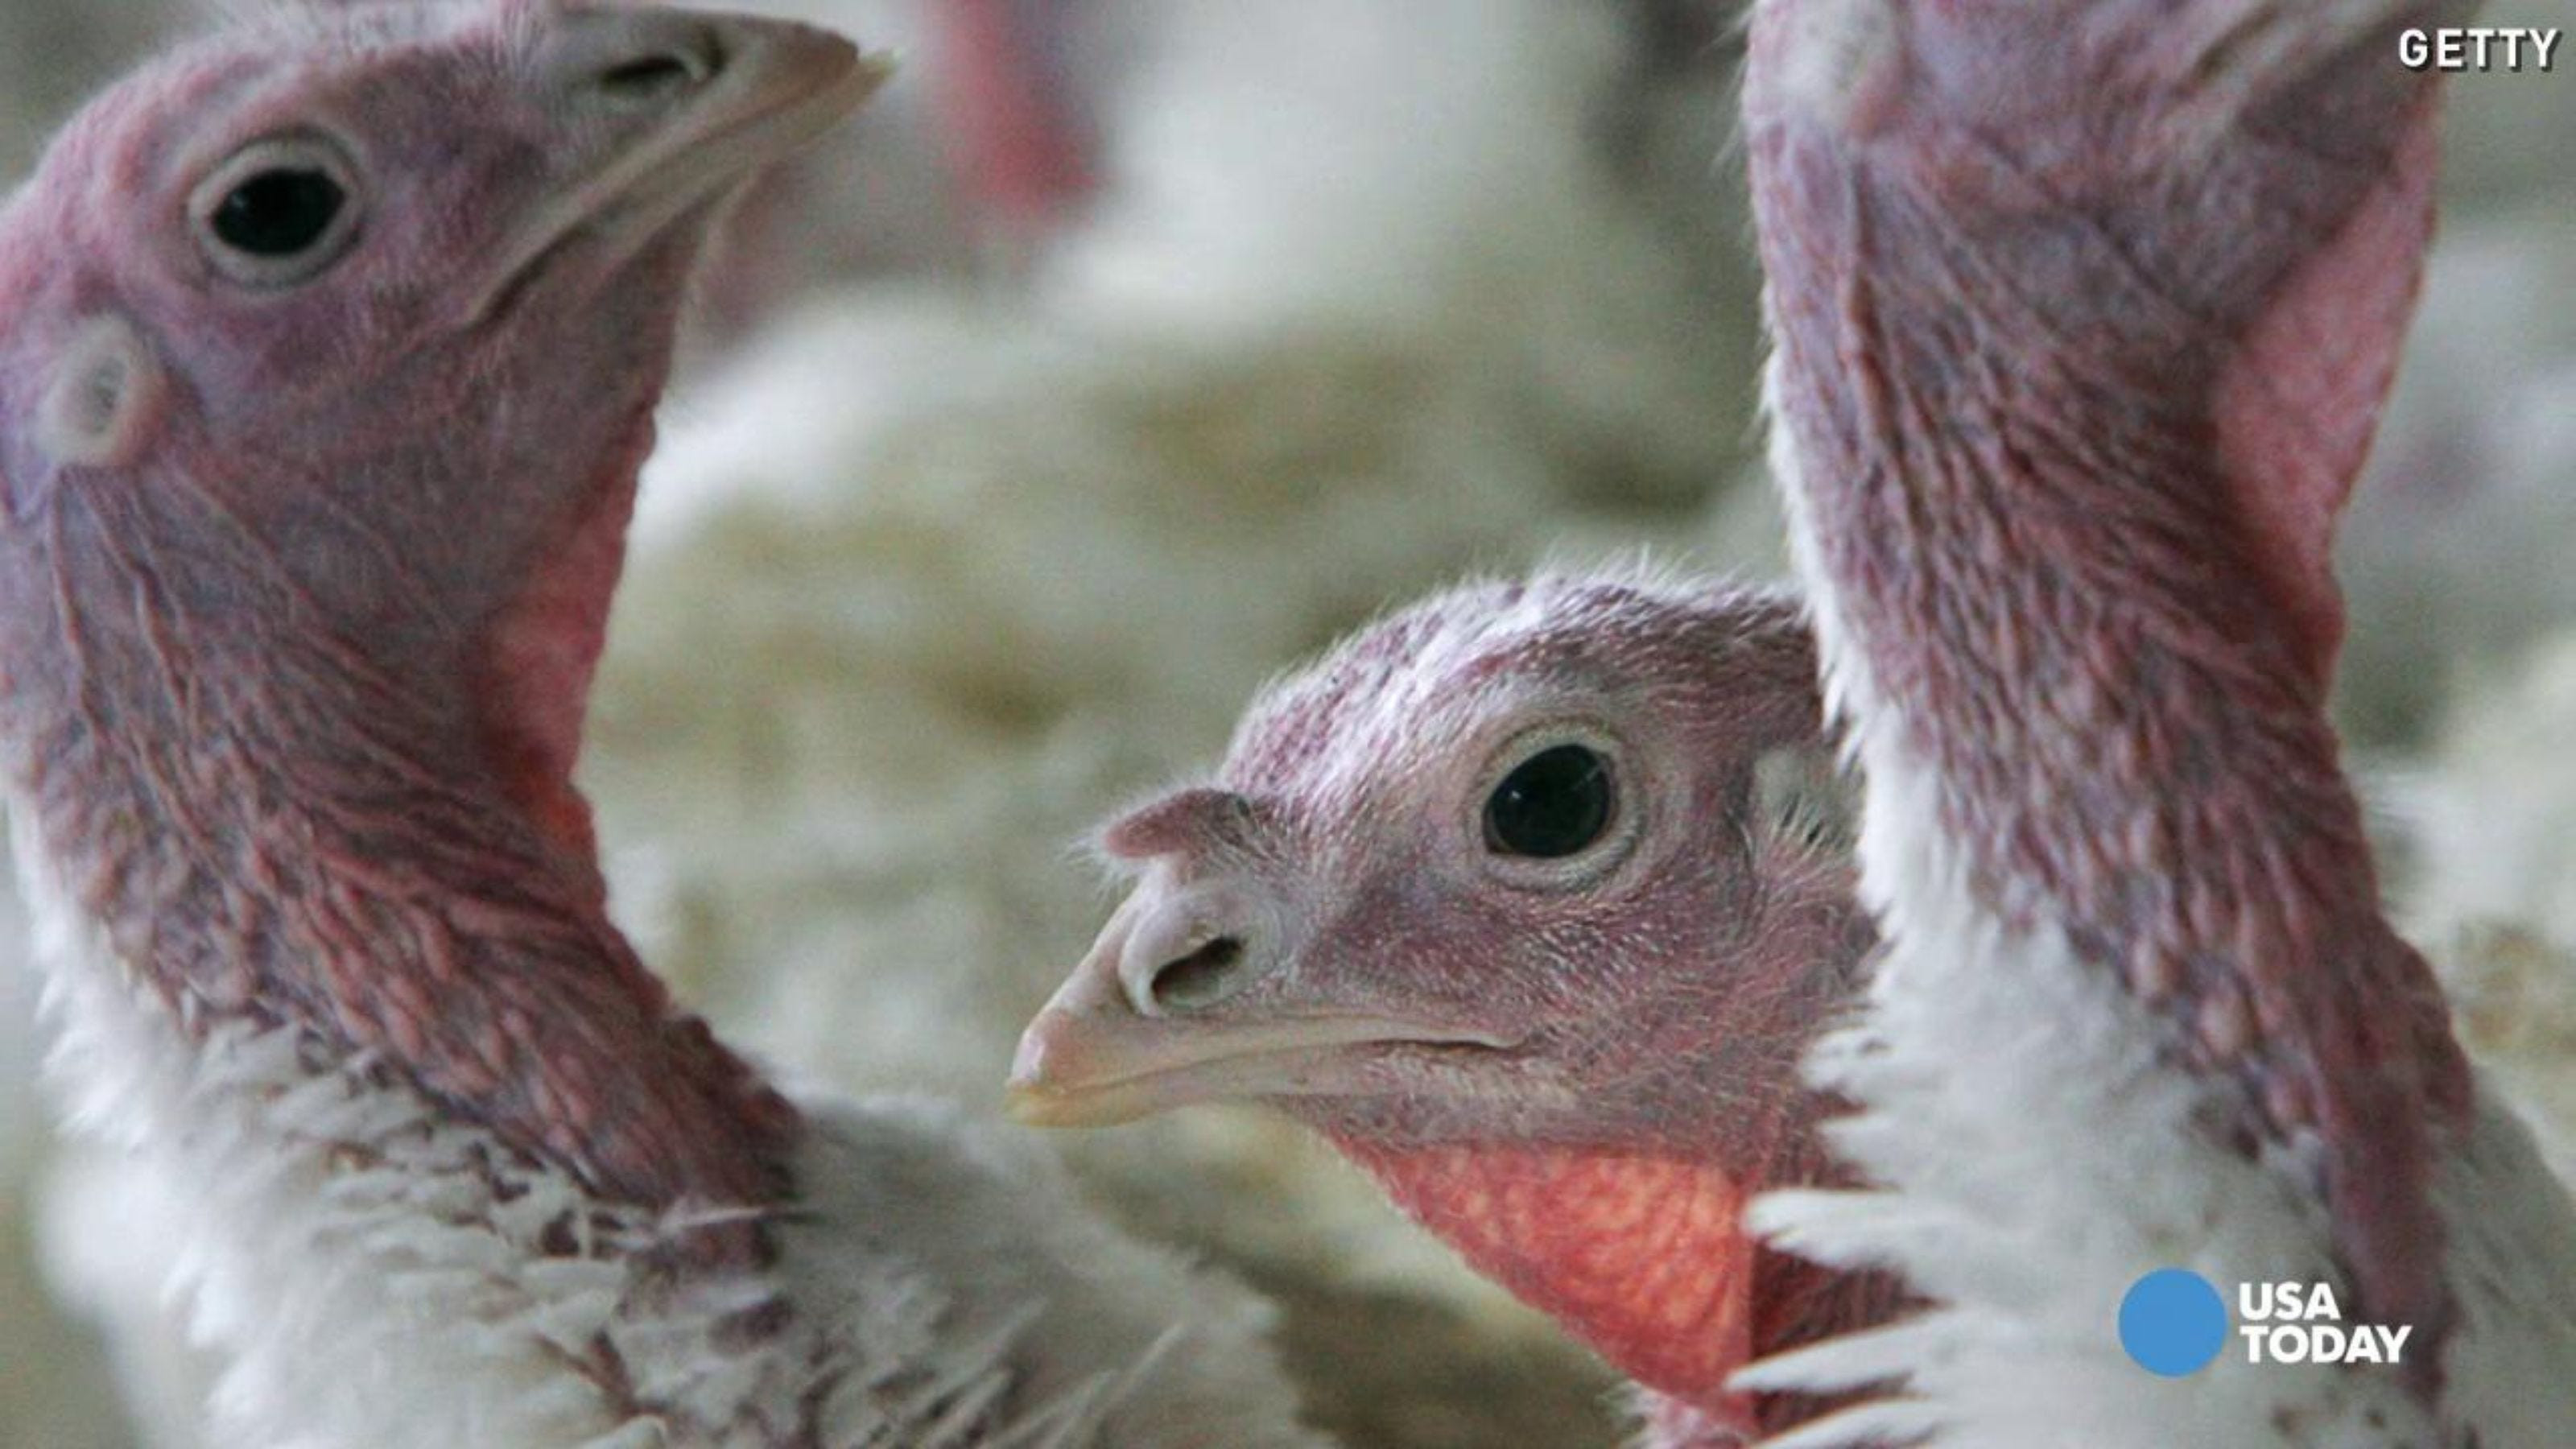 Turkey Shortage For Thanksgiving
 Grocery stores warn of Thanksgiving turkey shortage